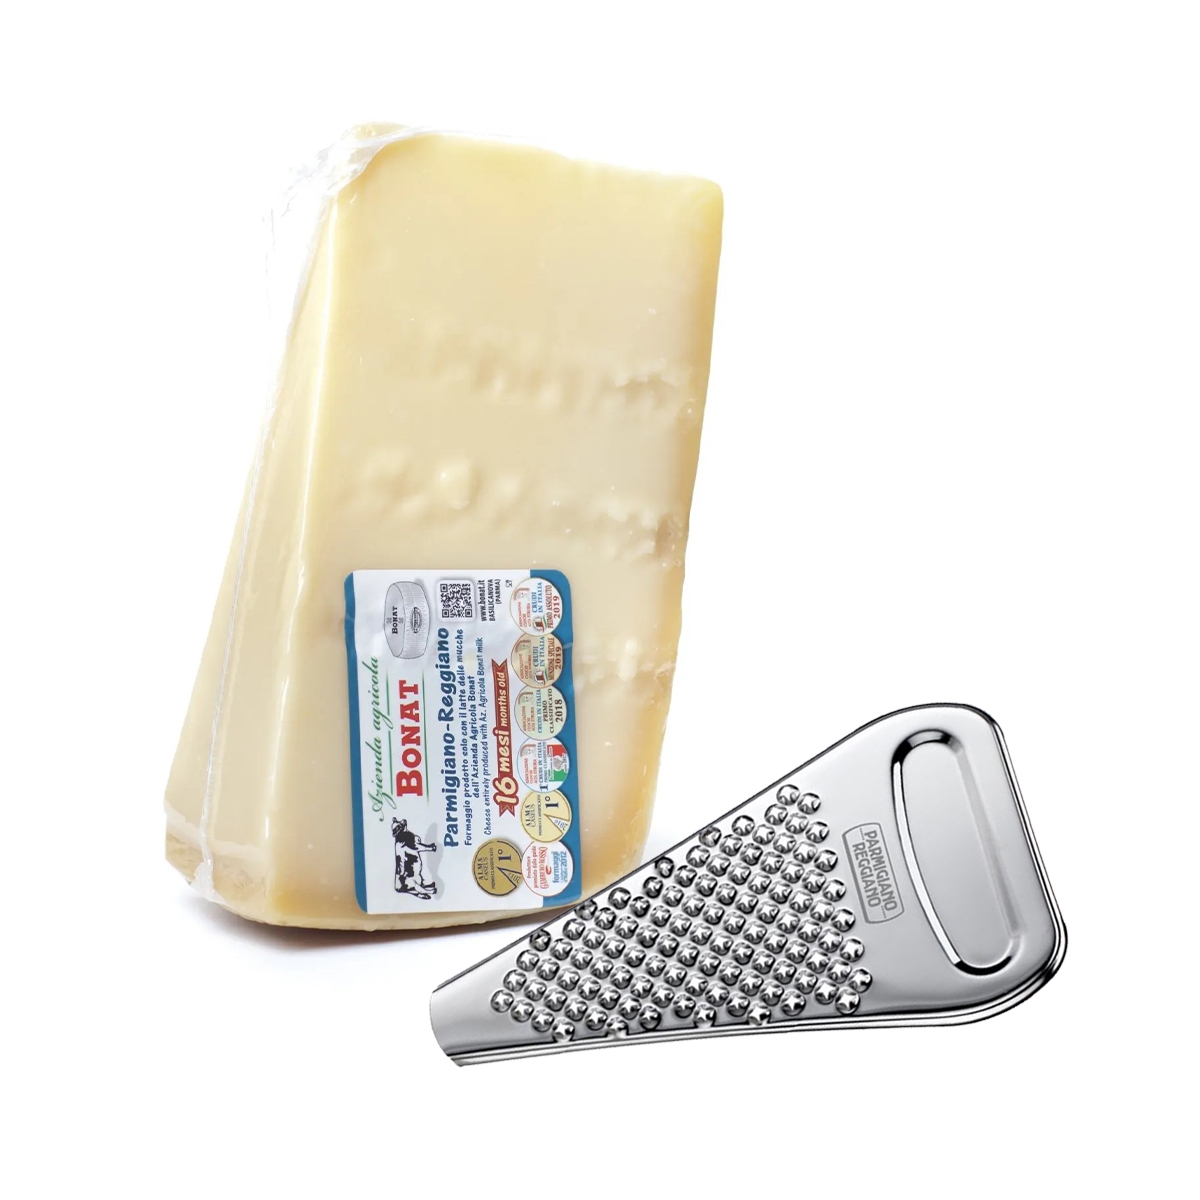 Parmigiano Reggiano DOP 16 Months 1Kg - Stainless Steel Grater